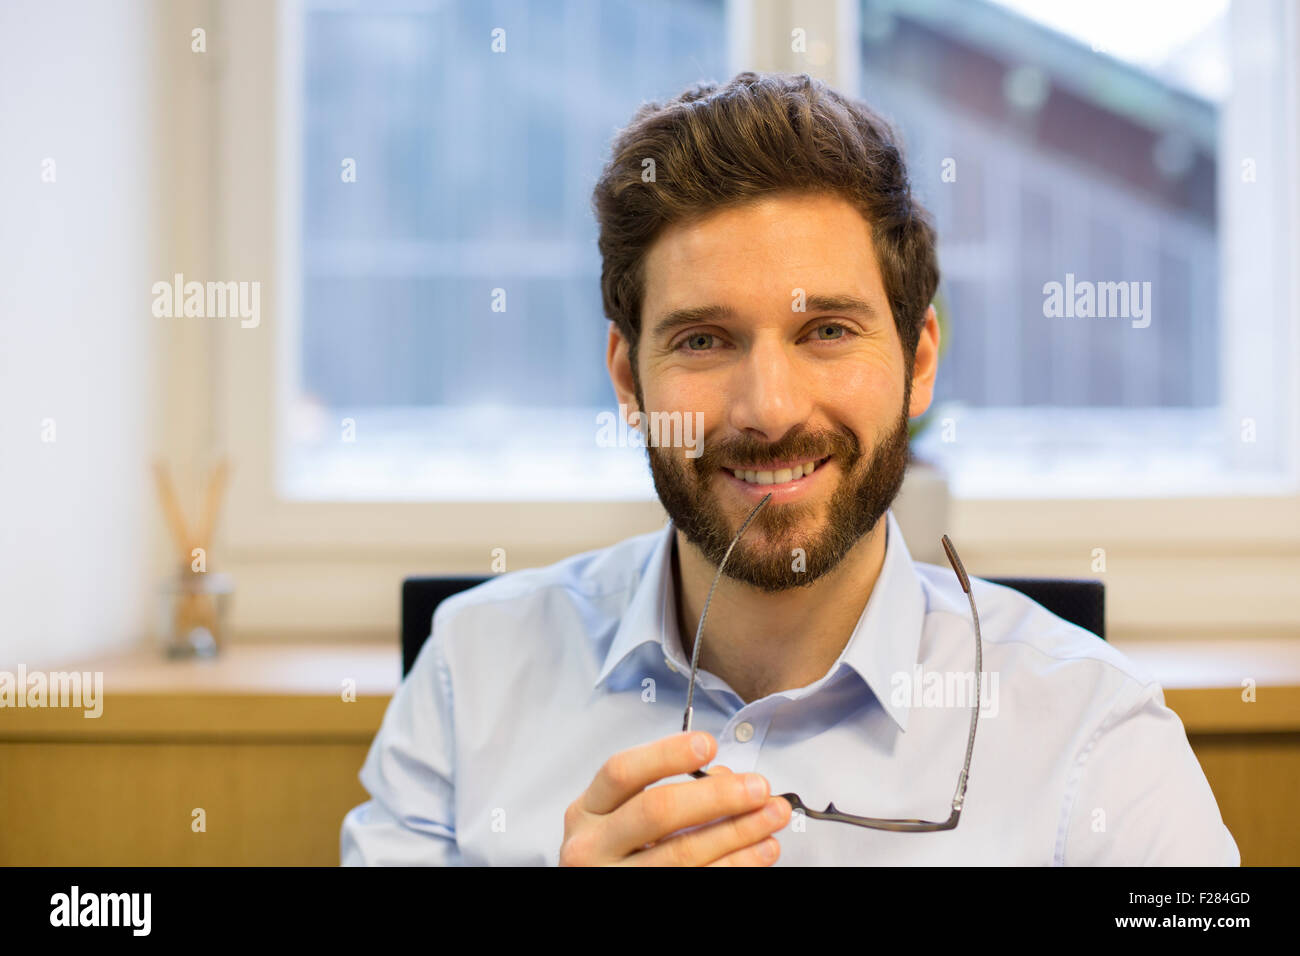 Portrait of man sitting at his desk in office Stock Photo